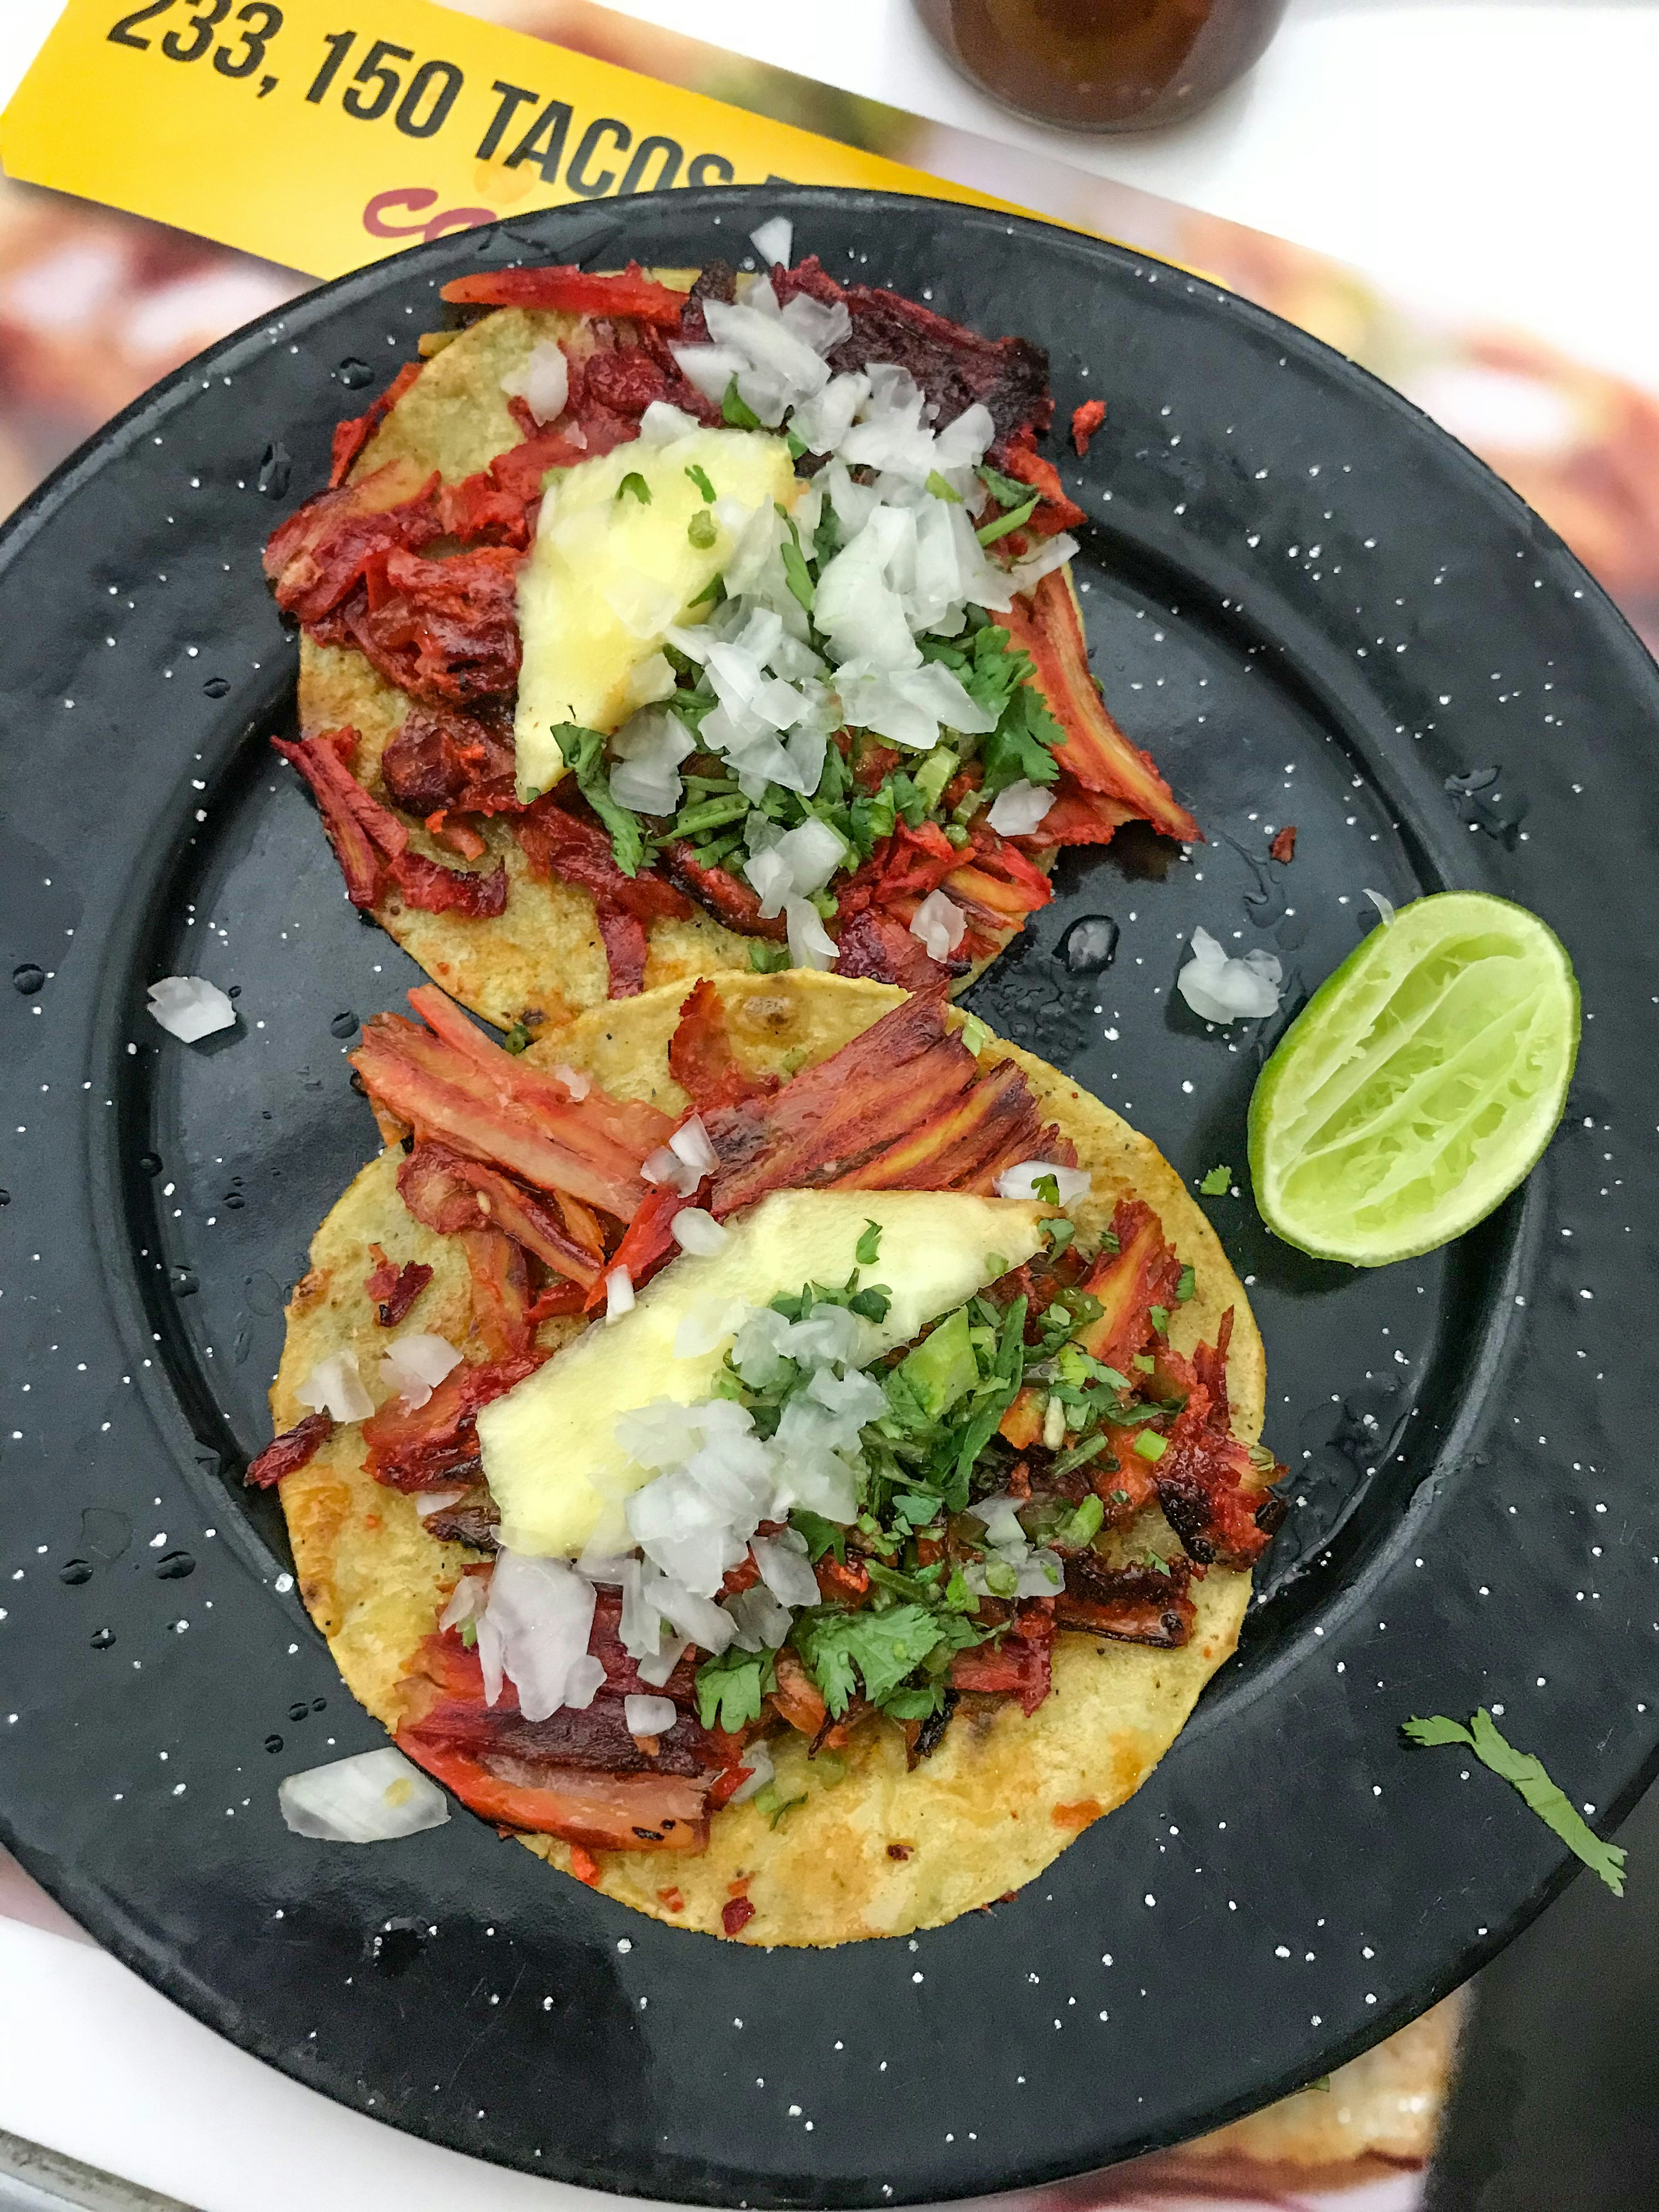 Two tacos with grilled meat, pineapple and cilantro on a red plate